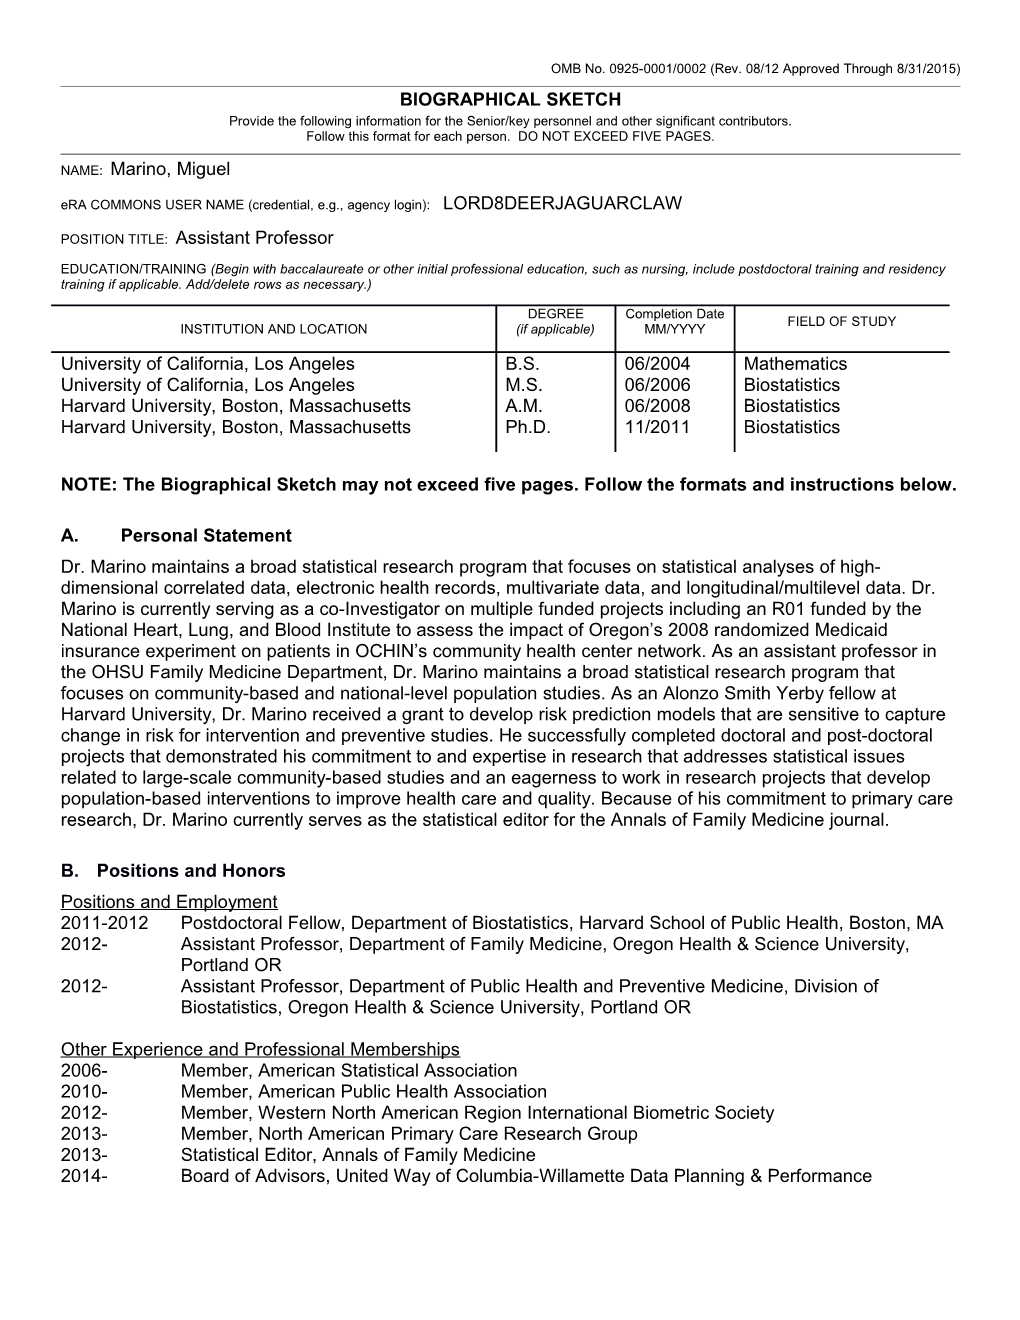 OMB No. 0925-0001/0002 (Rev. 08/12 Approved Through 8/31/2015)